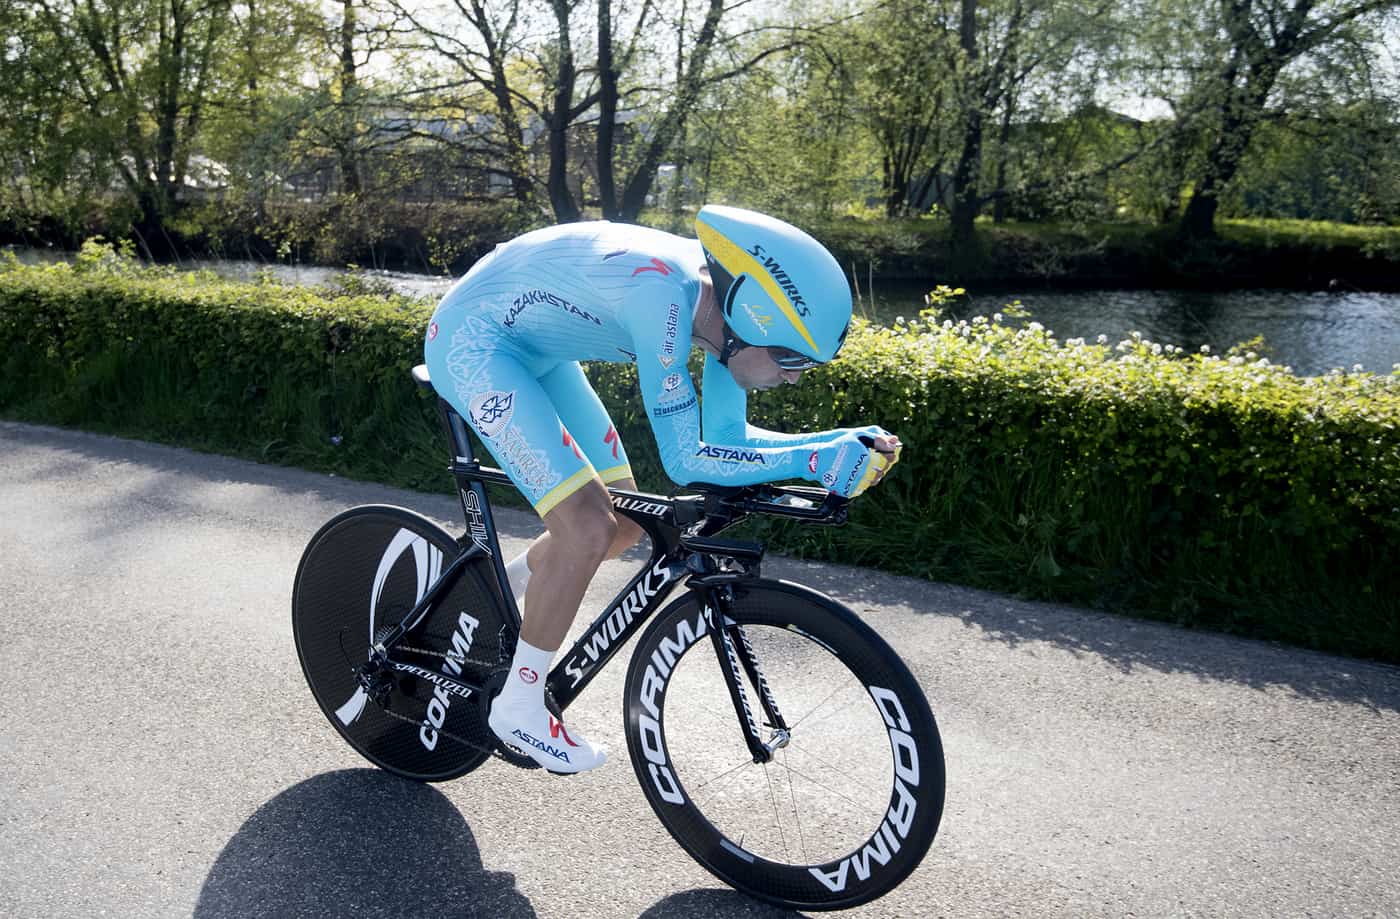 Vincenzo Nibali of Astana Pro Team during the TTT first stage Giro d’Italia cycling race in Apeldoorn, Nederland, 6 May 2016. ANSA/CLAUDIO PERI